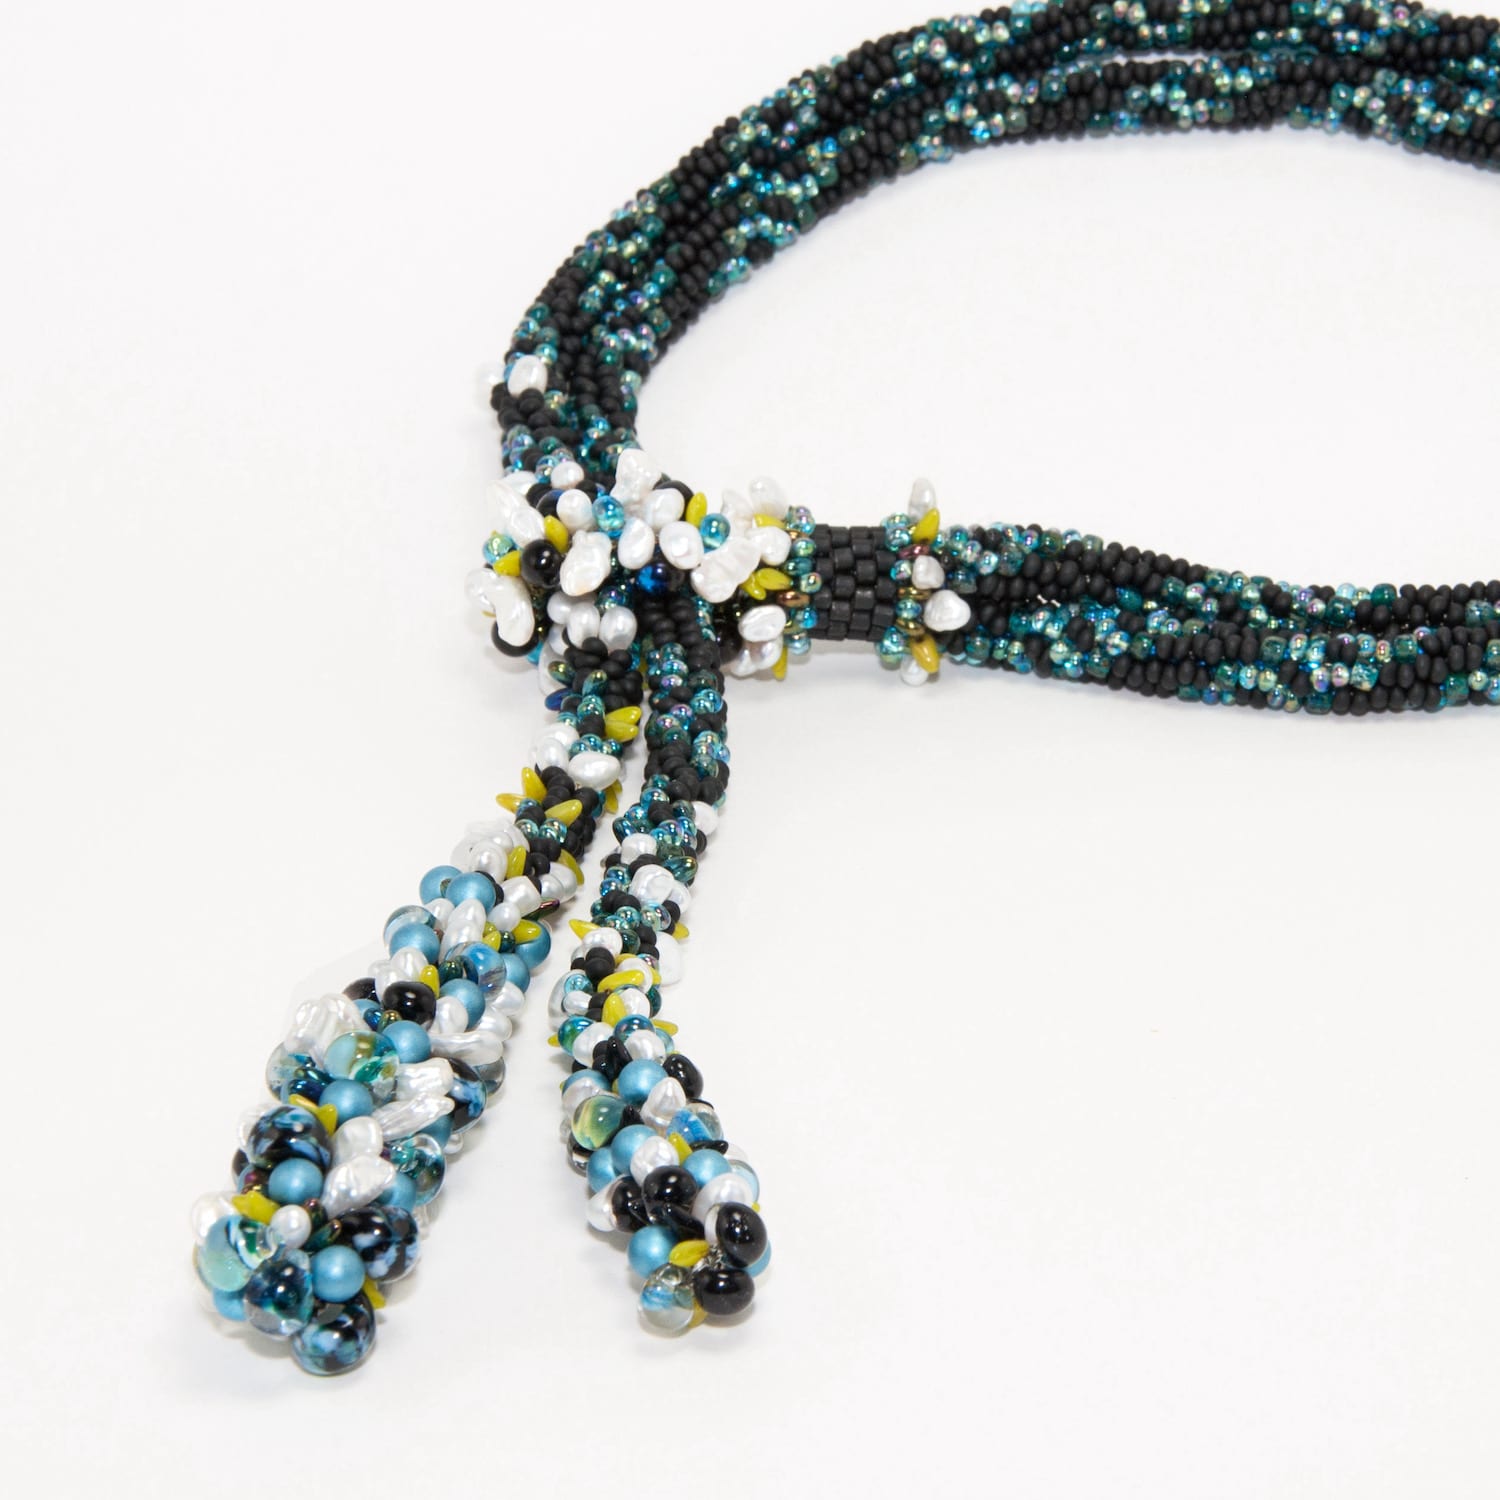 07-28-21 Fob Start for Beaded Braid – Kumihimo Resource – By Adrienne ...